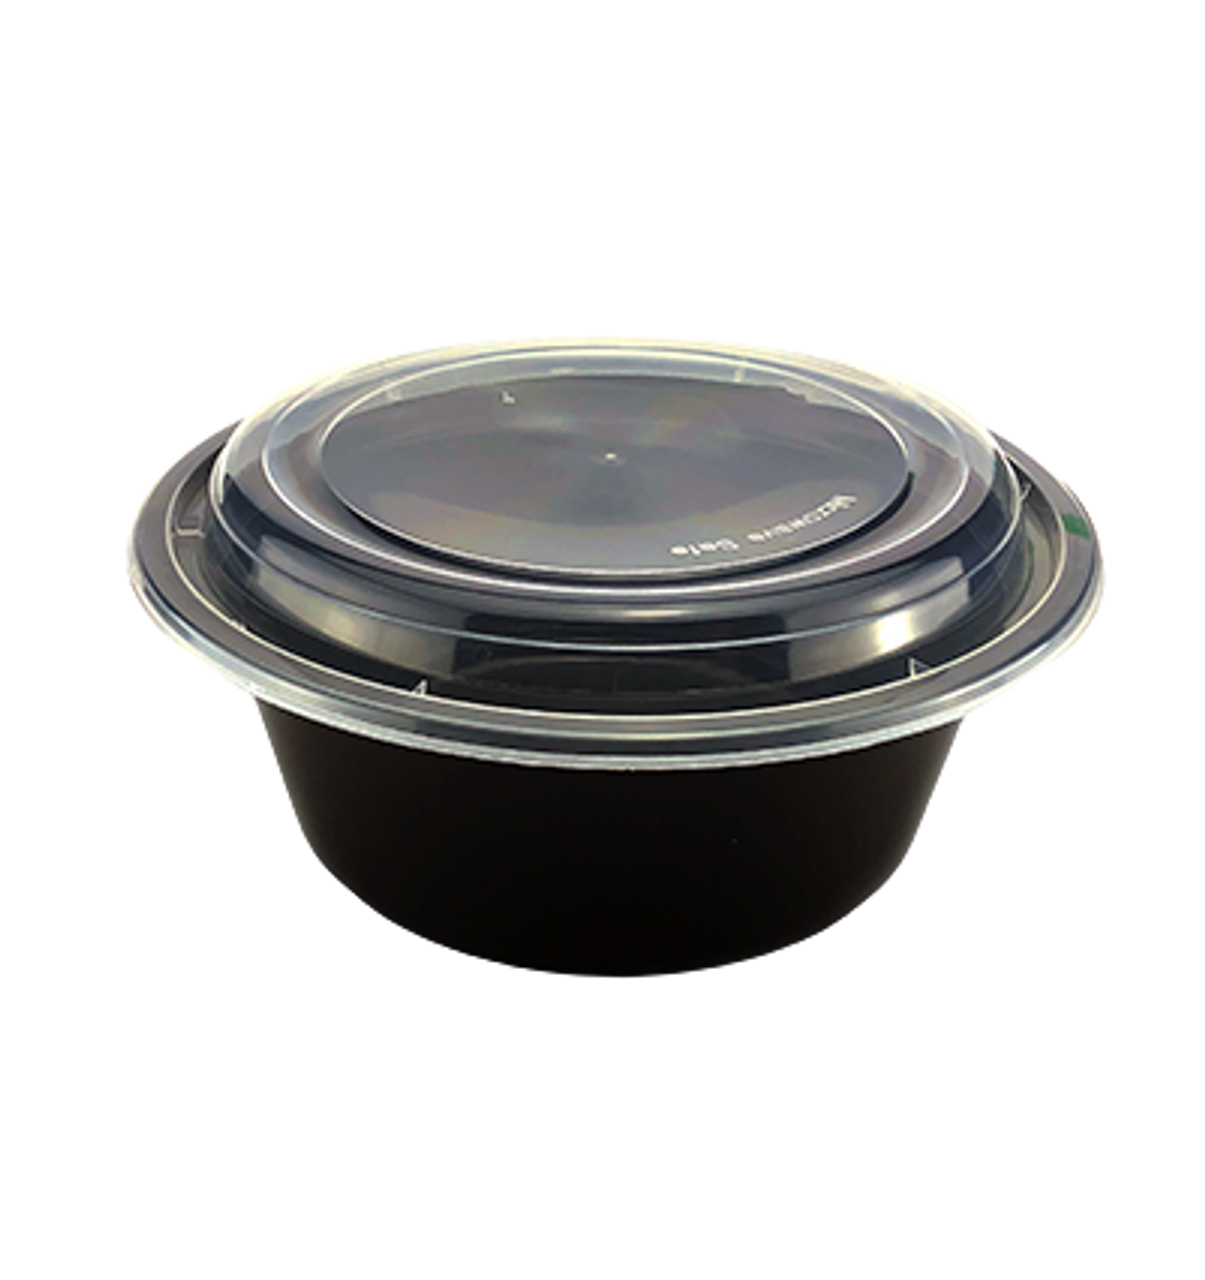 16 oz. Round Black Containers and Lids, Case of 150